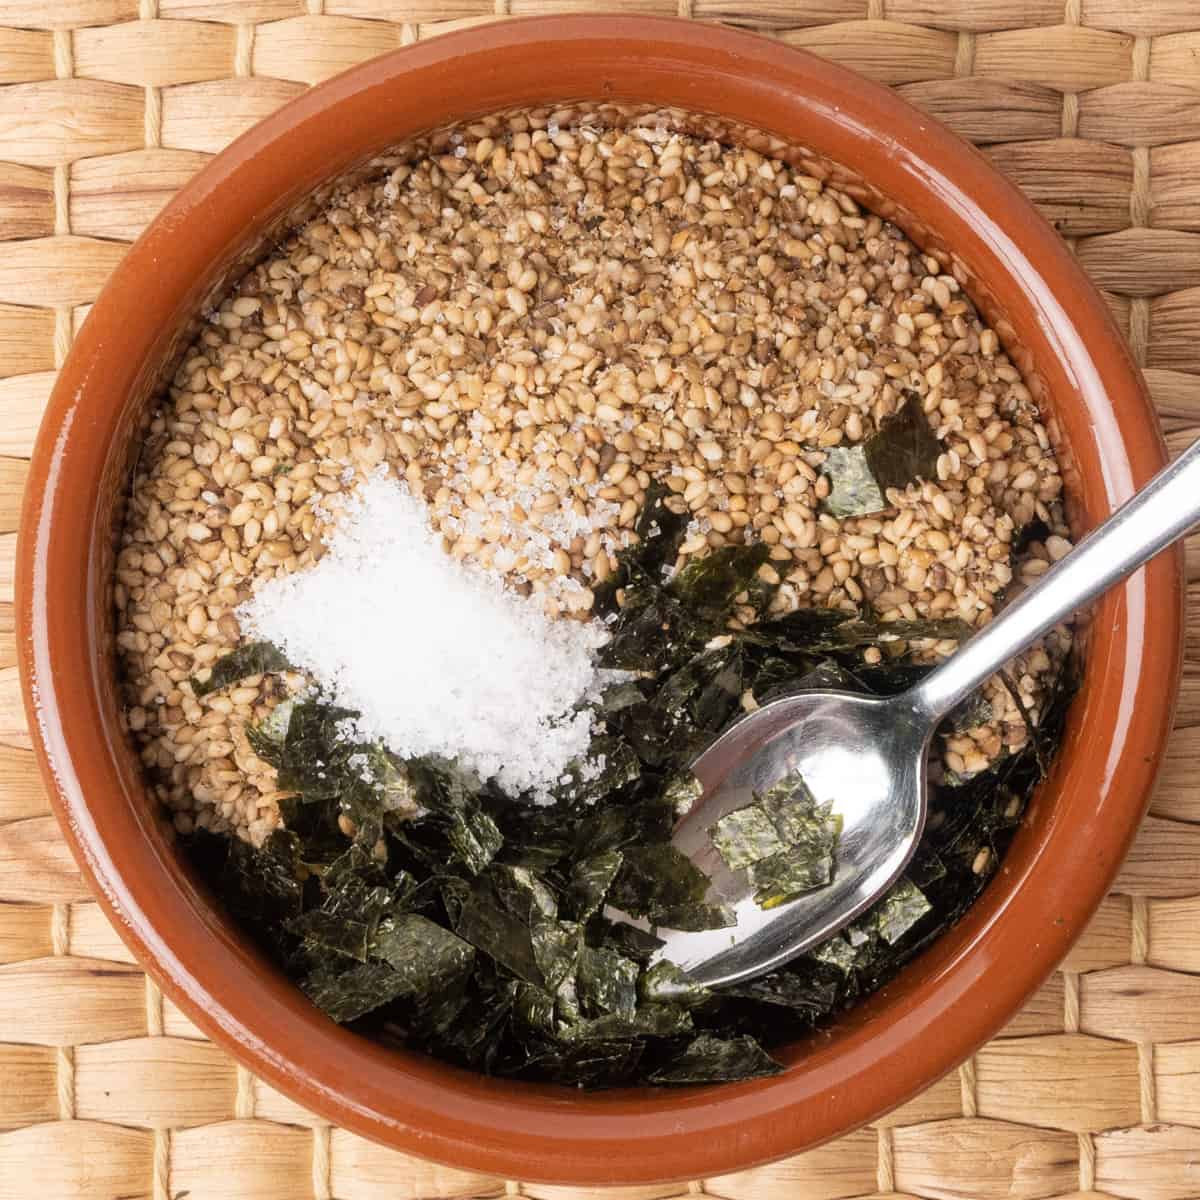 toasted sesame seeds and seaweed flakes combined with a pinch of sugar and salt to make furikake seasoning.